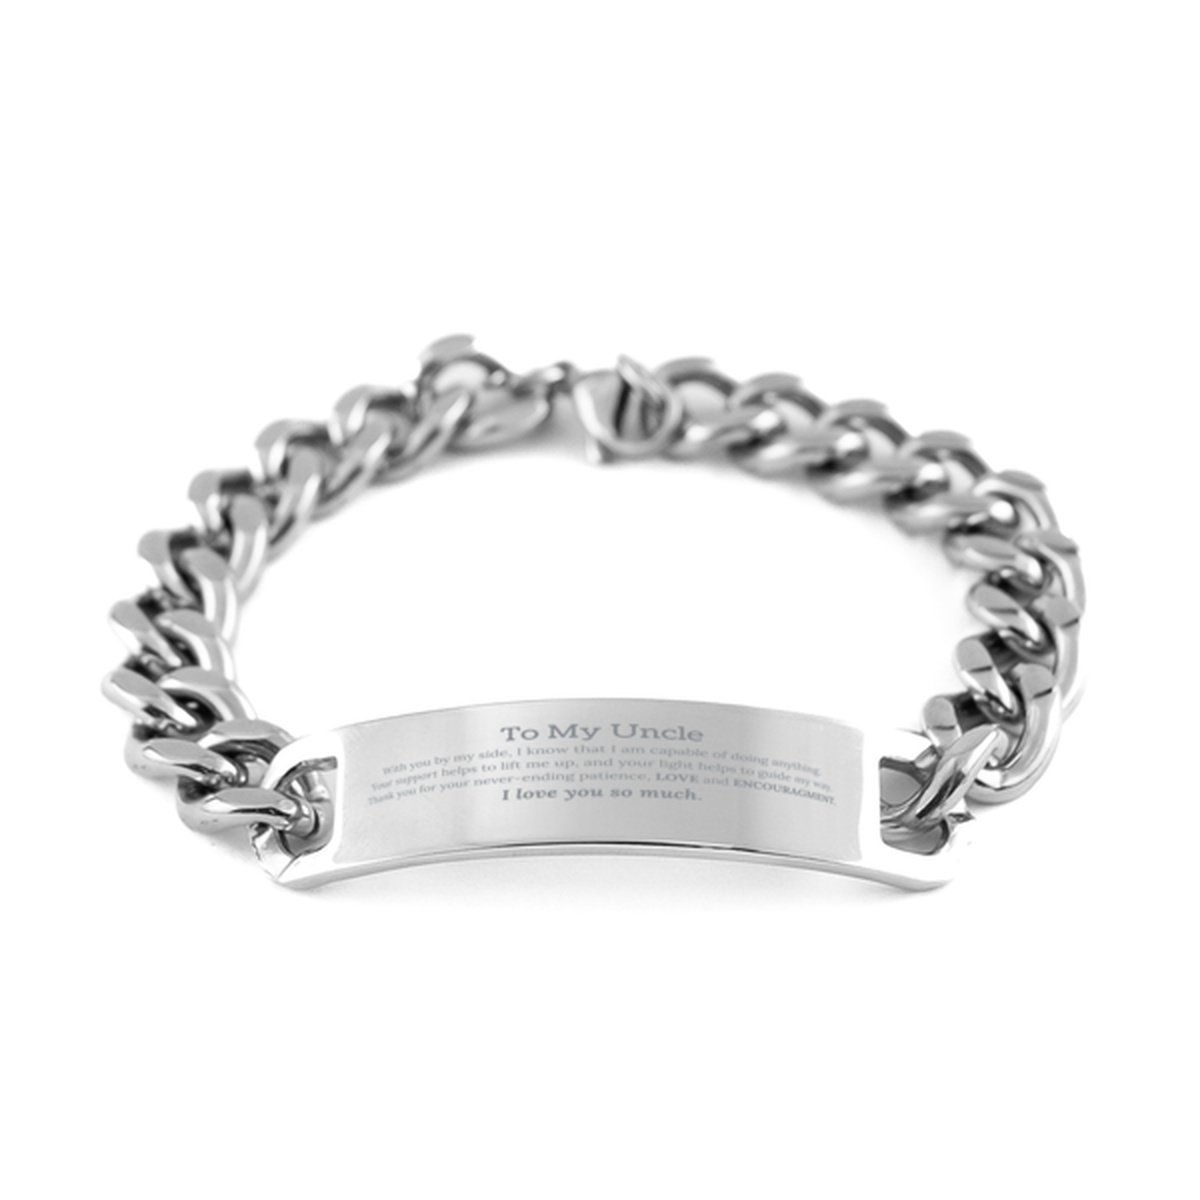 Appreciation Uncle Cuban Chain Stainless Steel Bracelet Gifts, To My Uncle Birthday Christmas Wedding Keepsake Gifts for Uncle With you by my side, I know that I am capable of doing anything. I love you so much